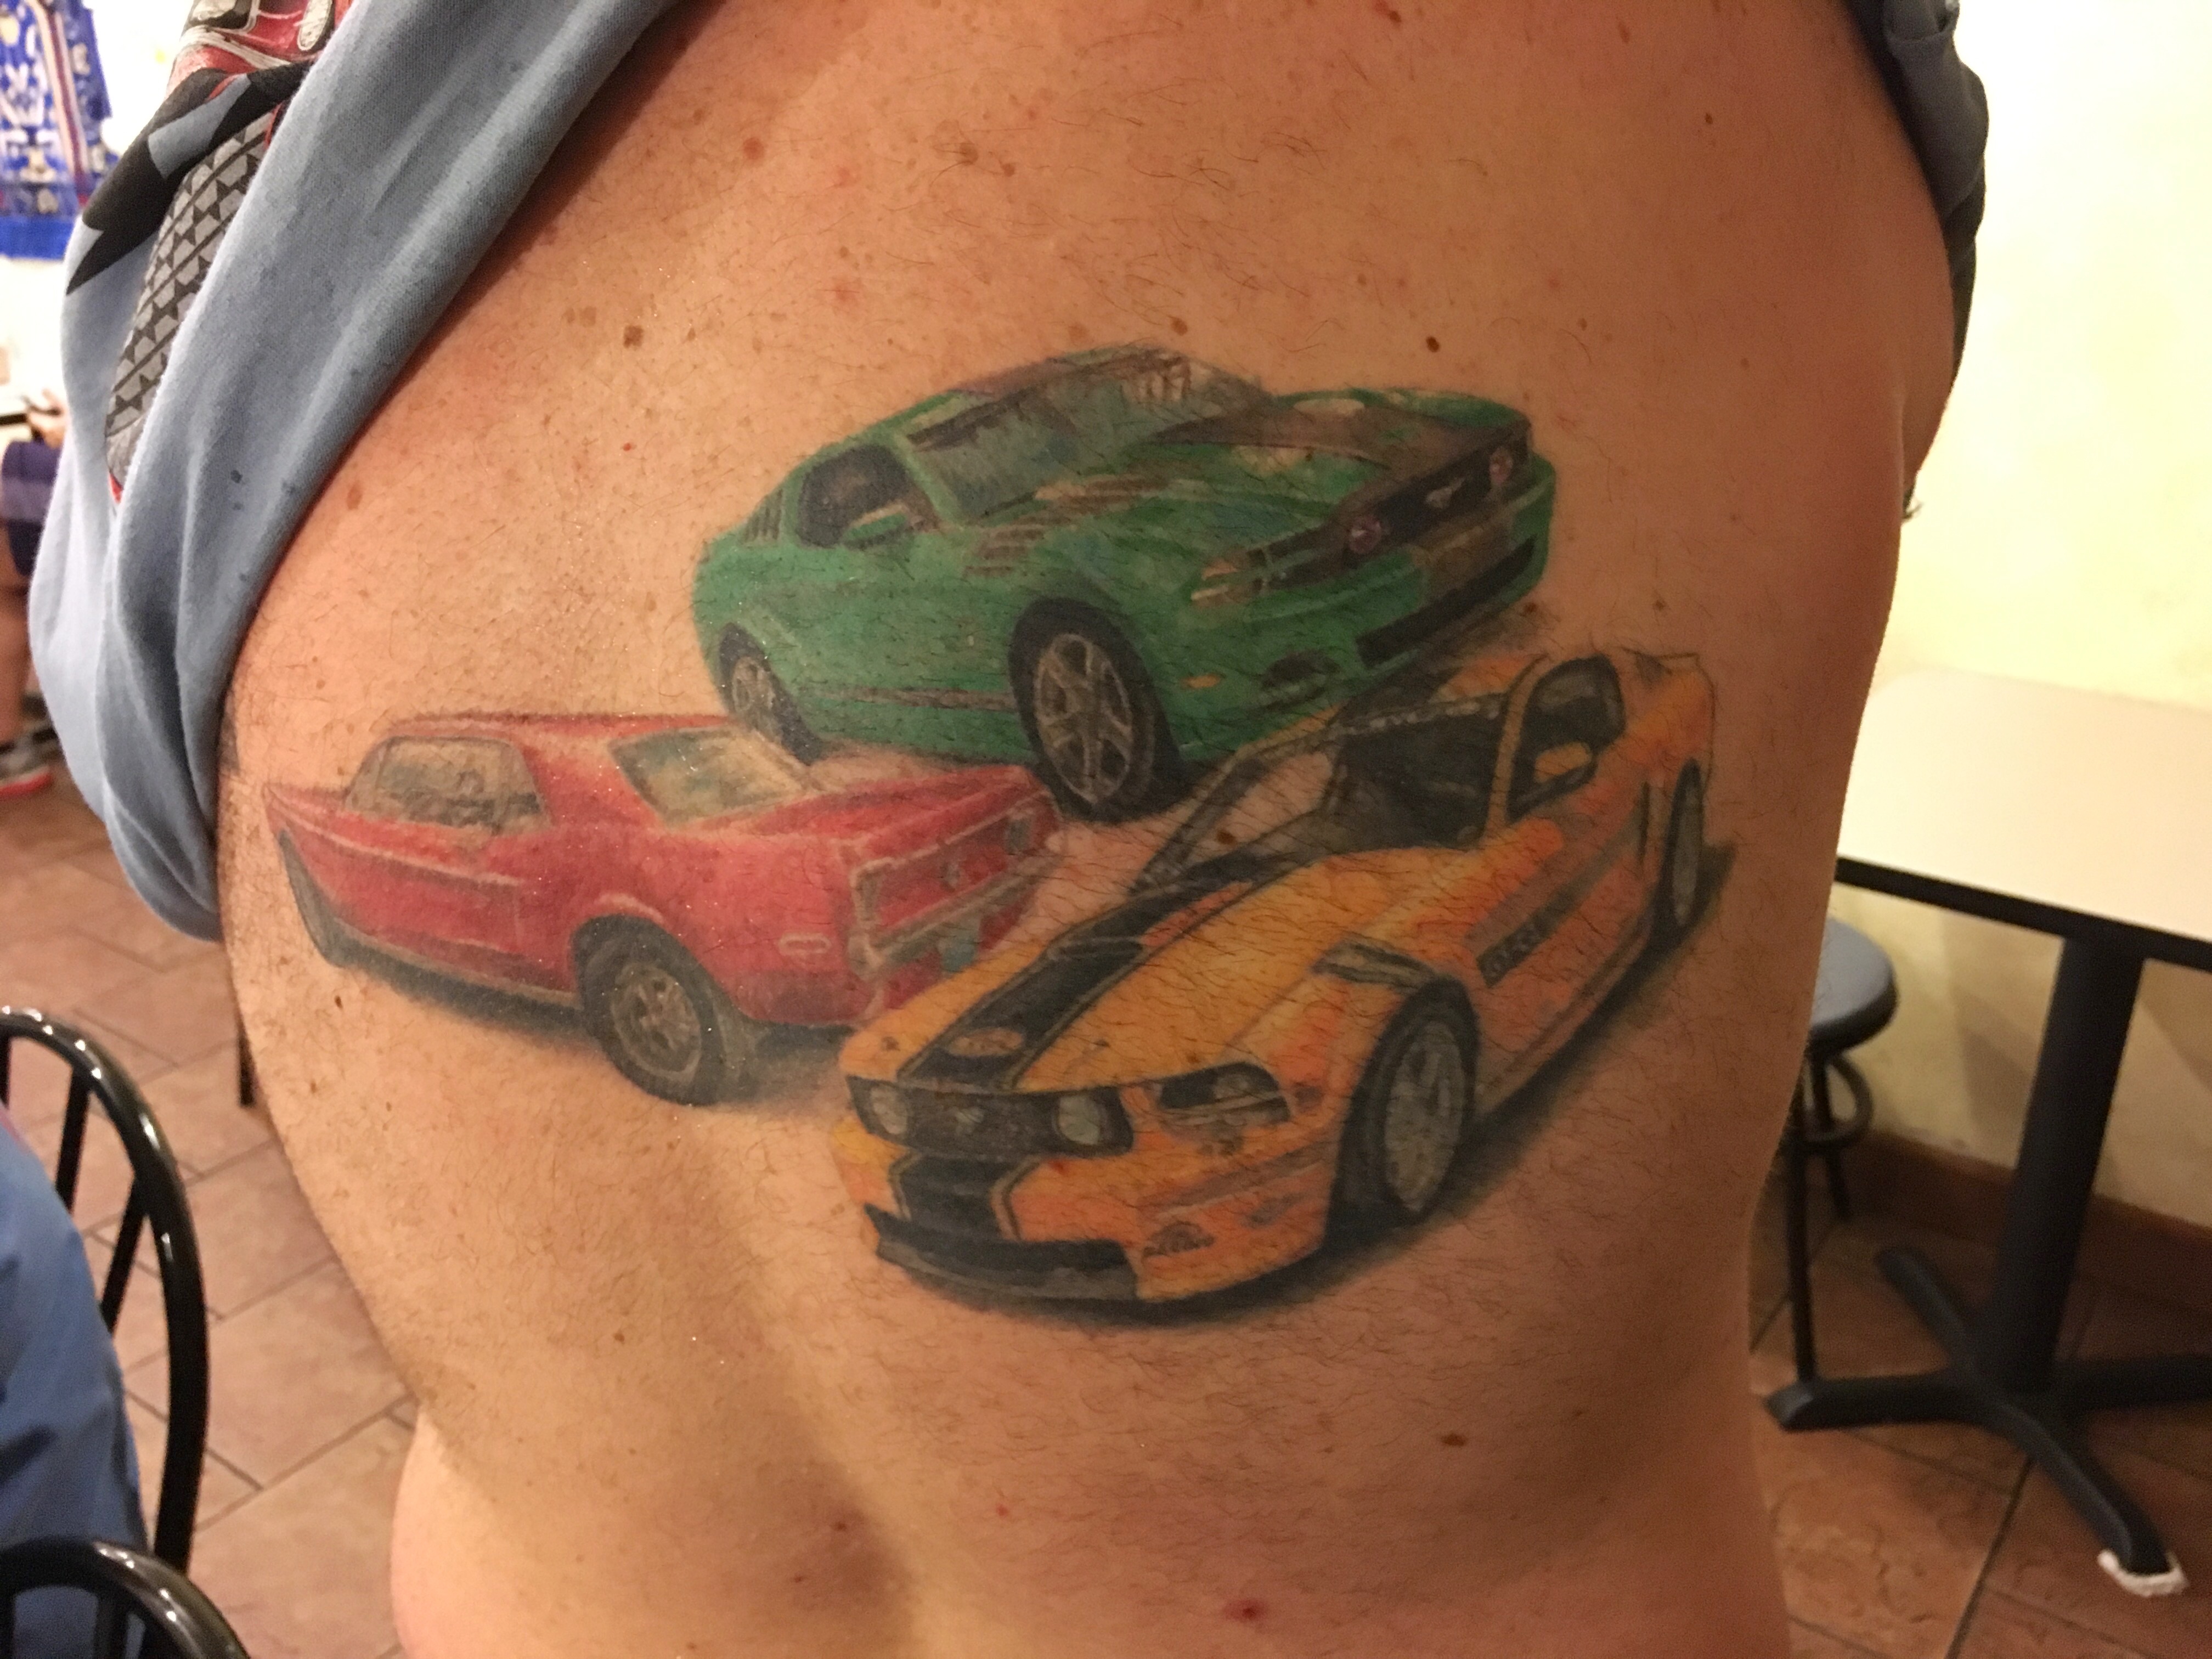 RandomsTattoos - Throwback to this rad Hot-Wheels piece! Tattoo by Random!  To book your free consultation just Text 719.229.1563 now! Thanks for  looking! Instagram.com/RandomsTattoos 🙏🙏🙏 | Facebook